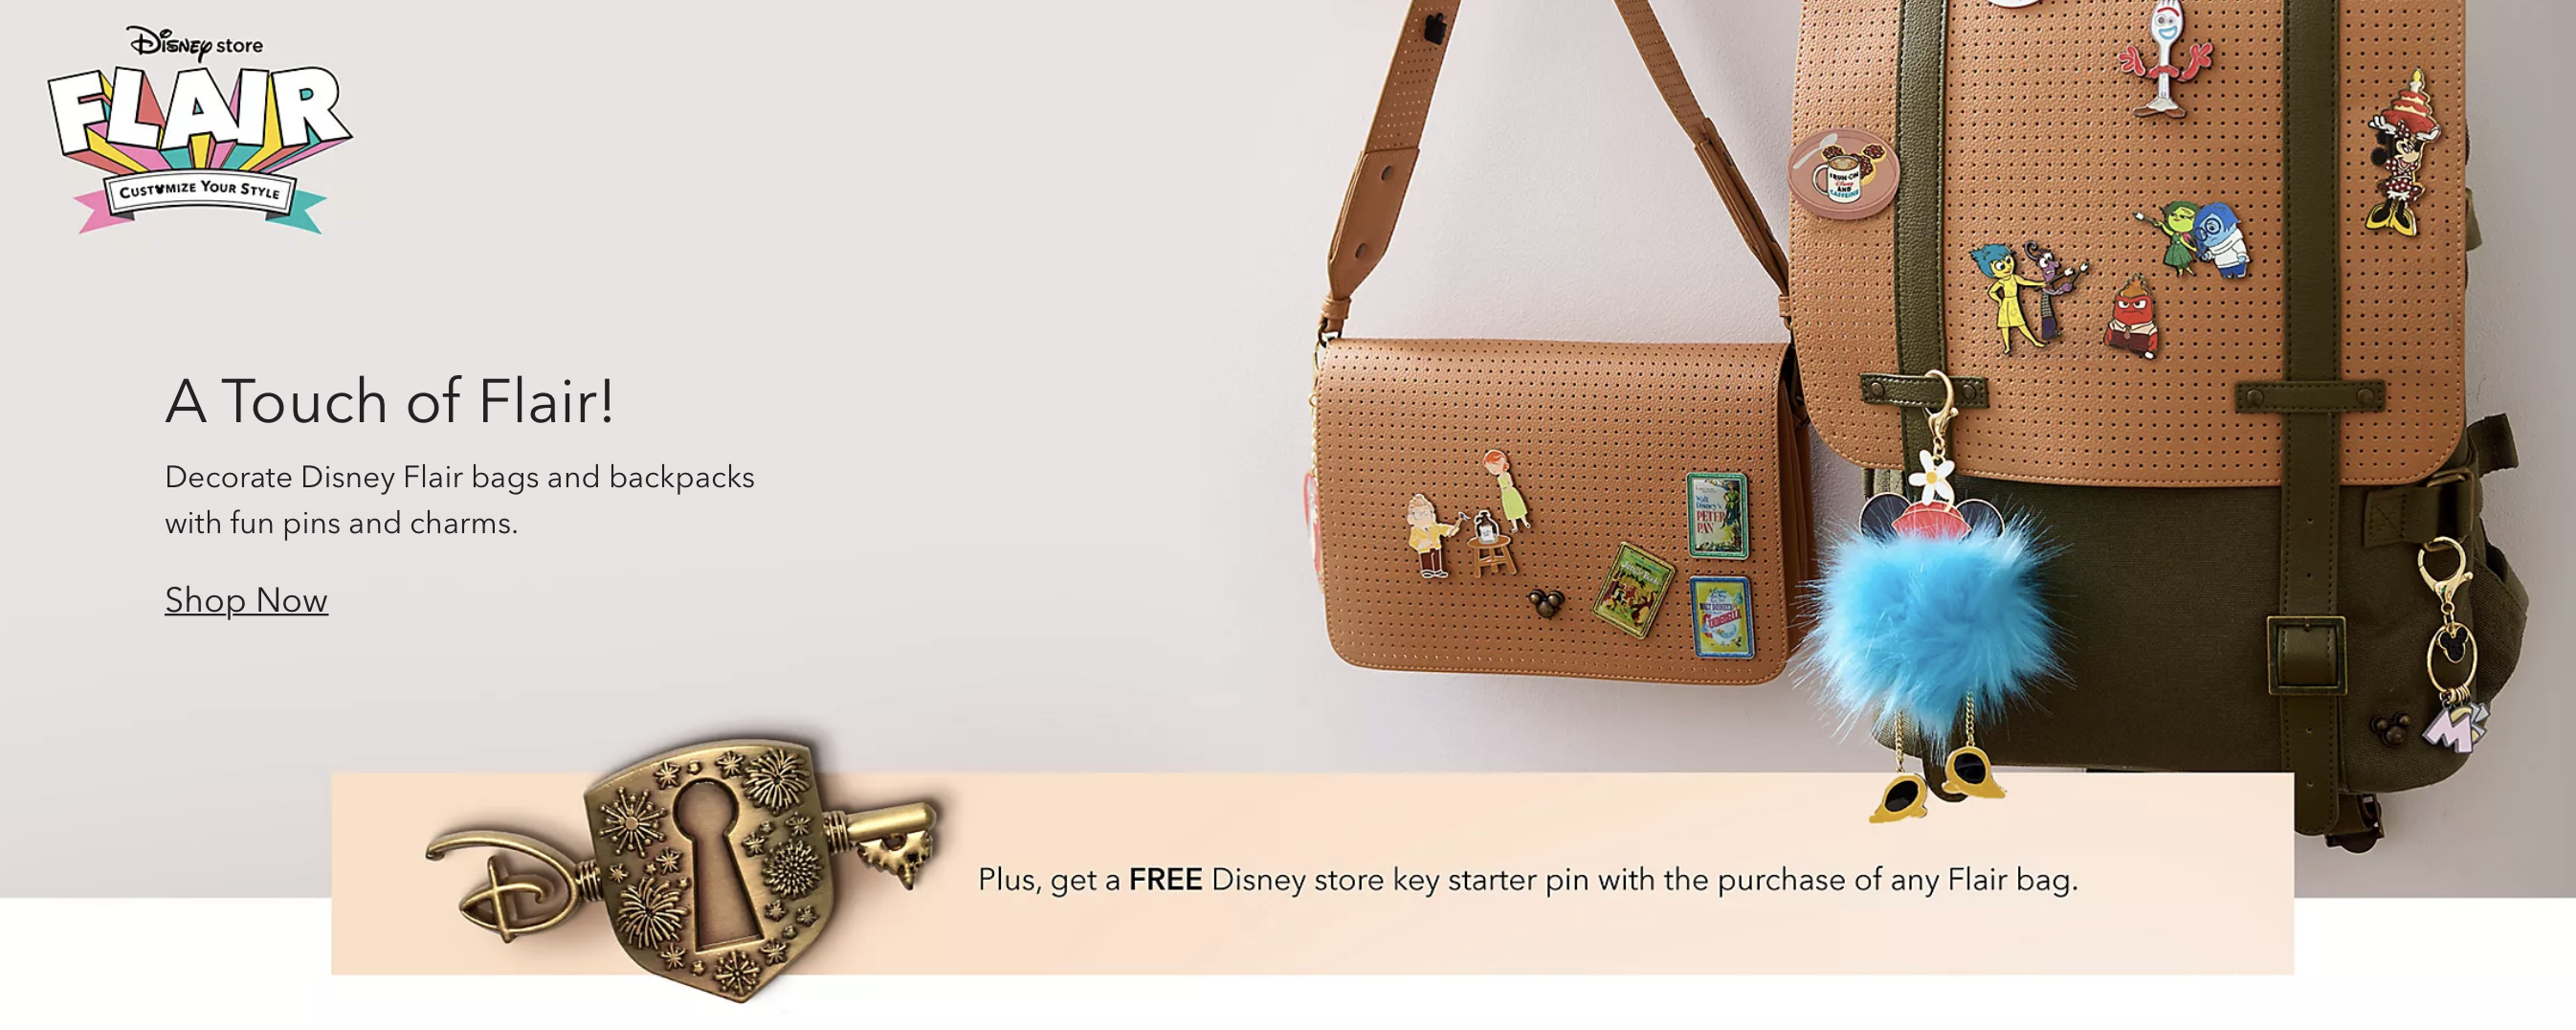 These New Disney Bags are Designed to Show Off Your Pin Collection